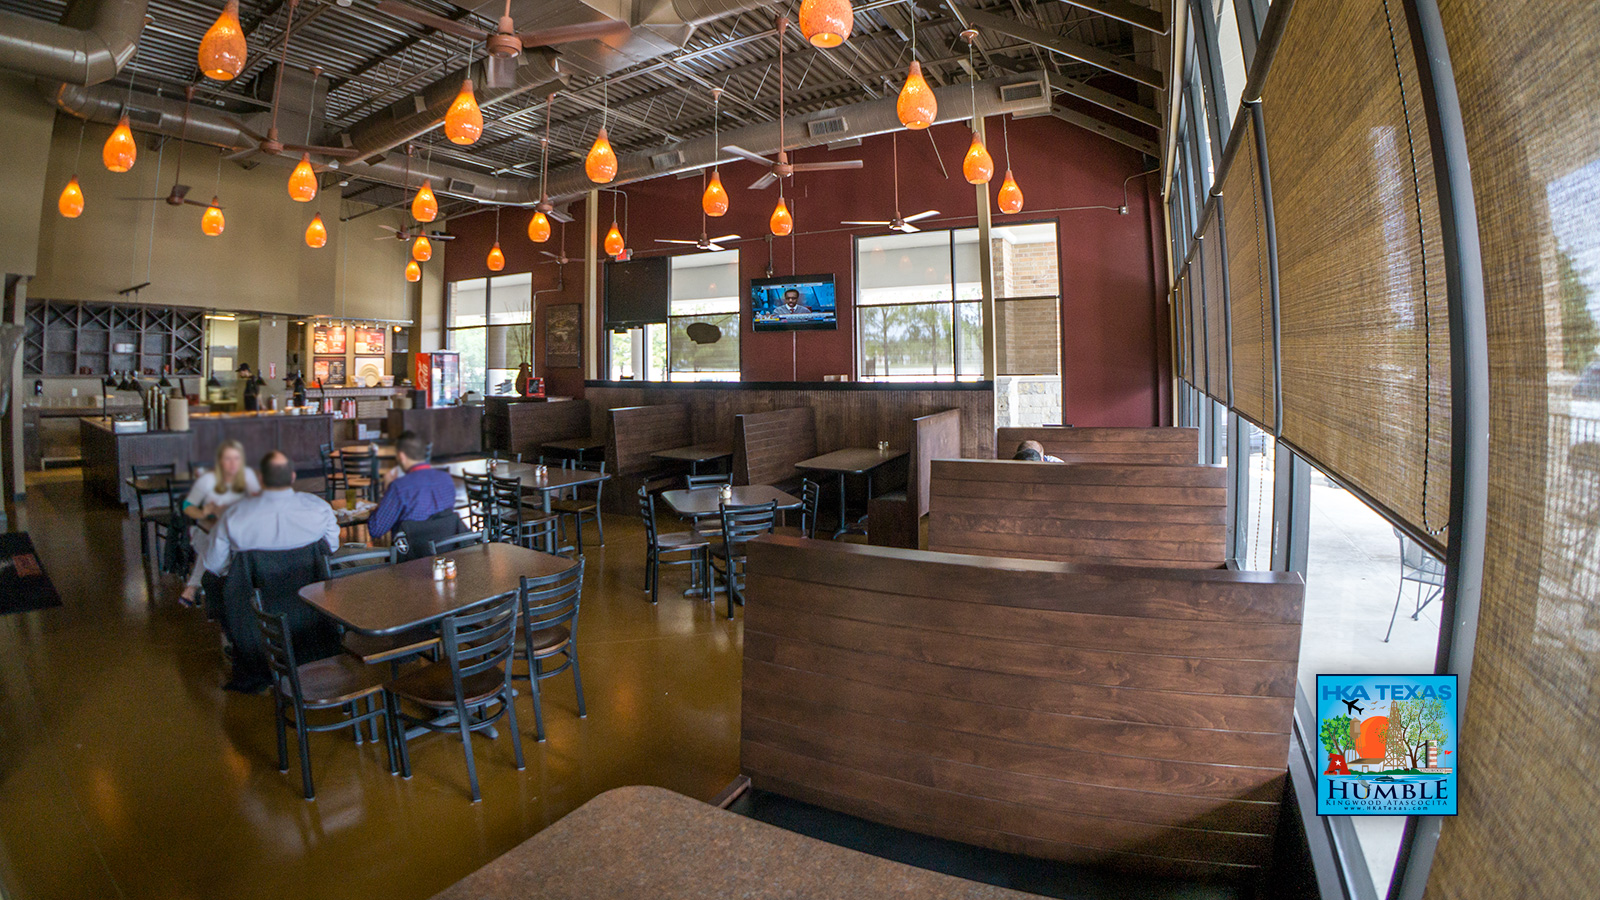 Godfather’s Pizza NOW OPEN in Fall Creek - Humble, Texas1600 x 900